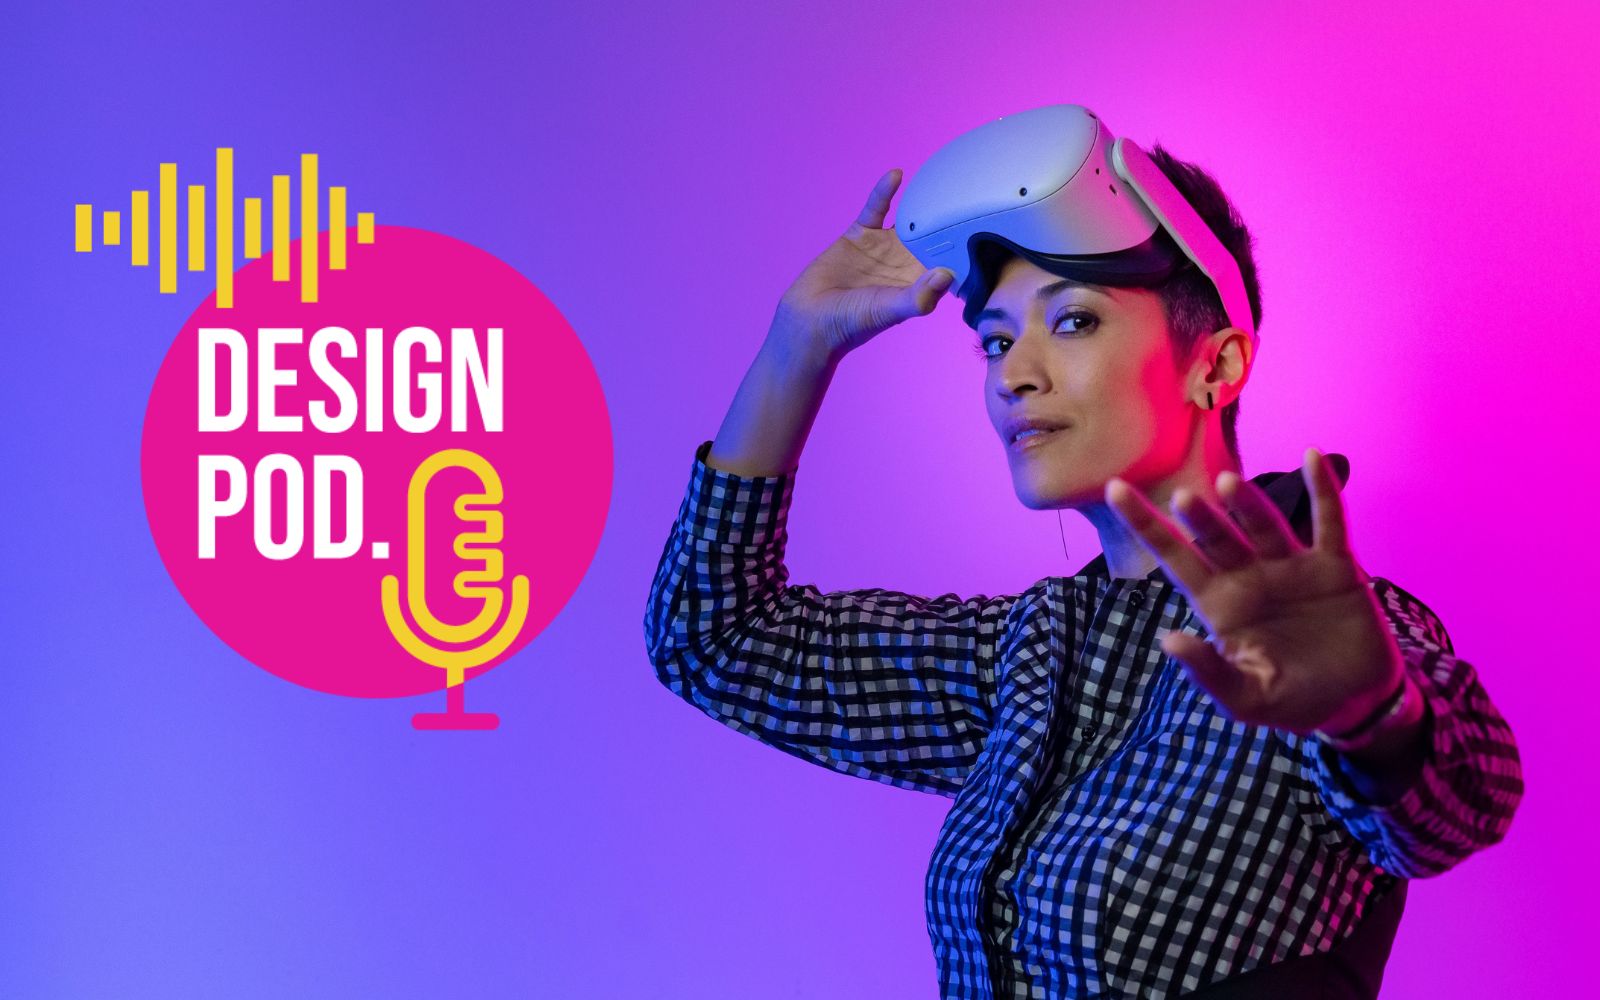 DESIGN POD: Pallavi Dean standing, looking at the camera, taking off a VR headset